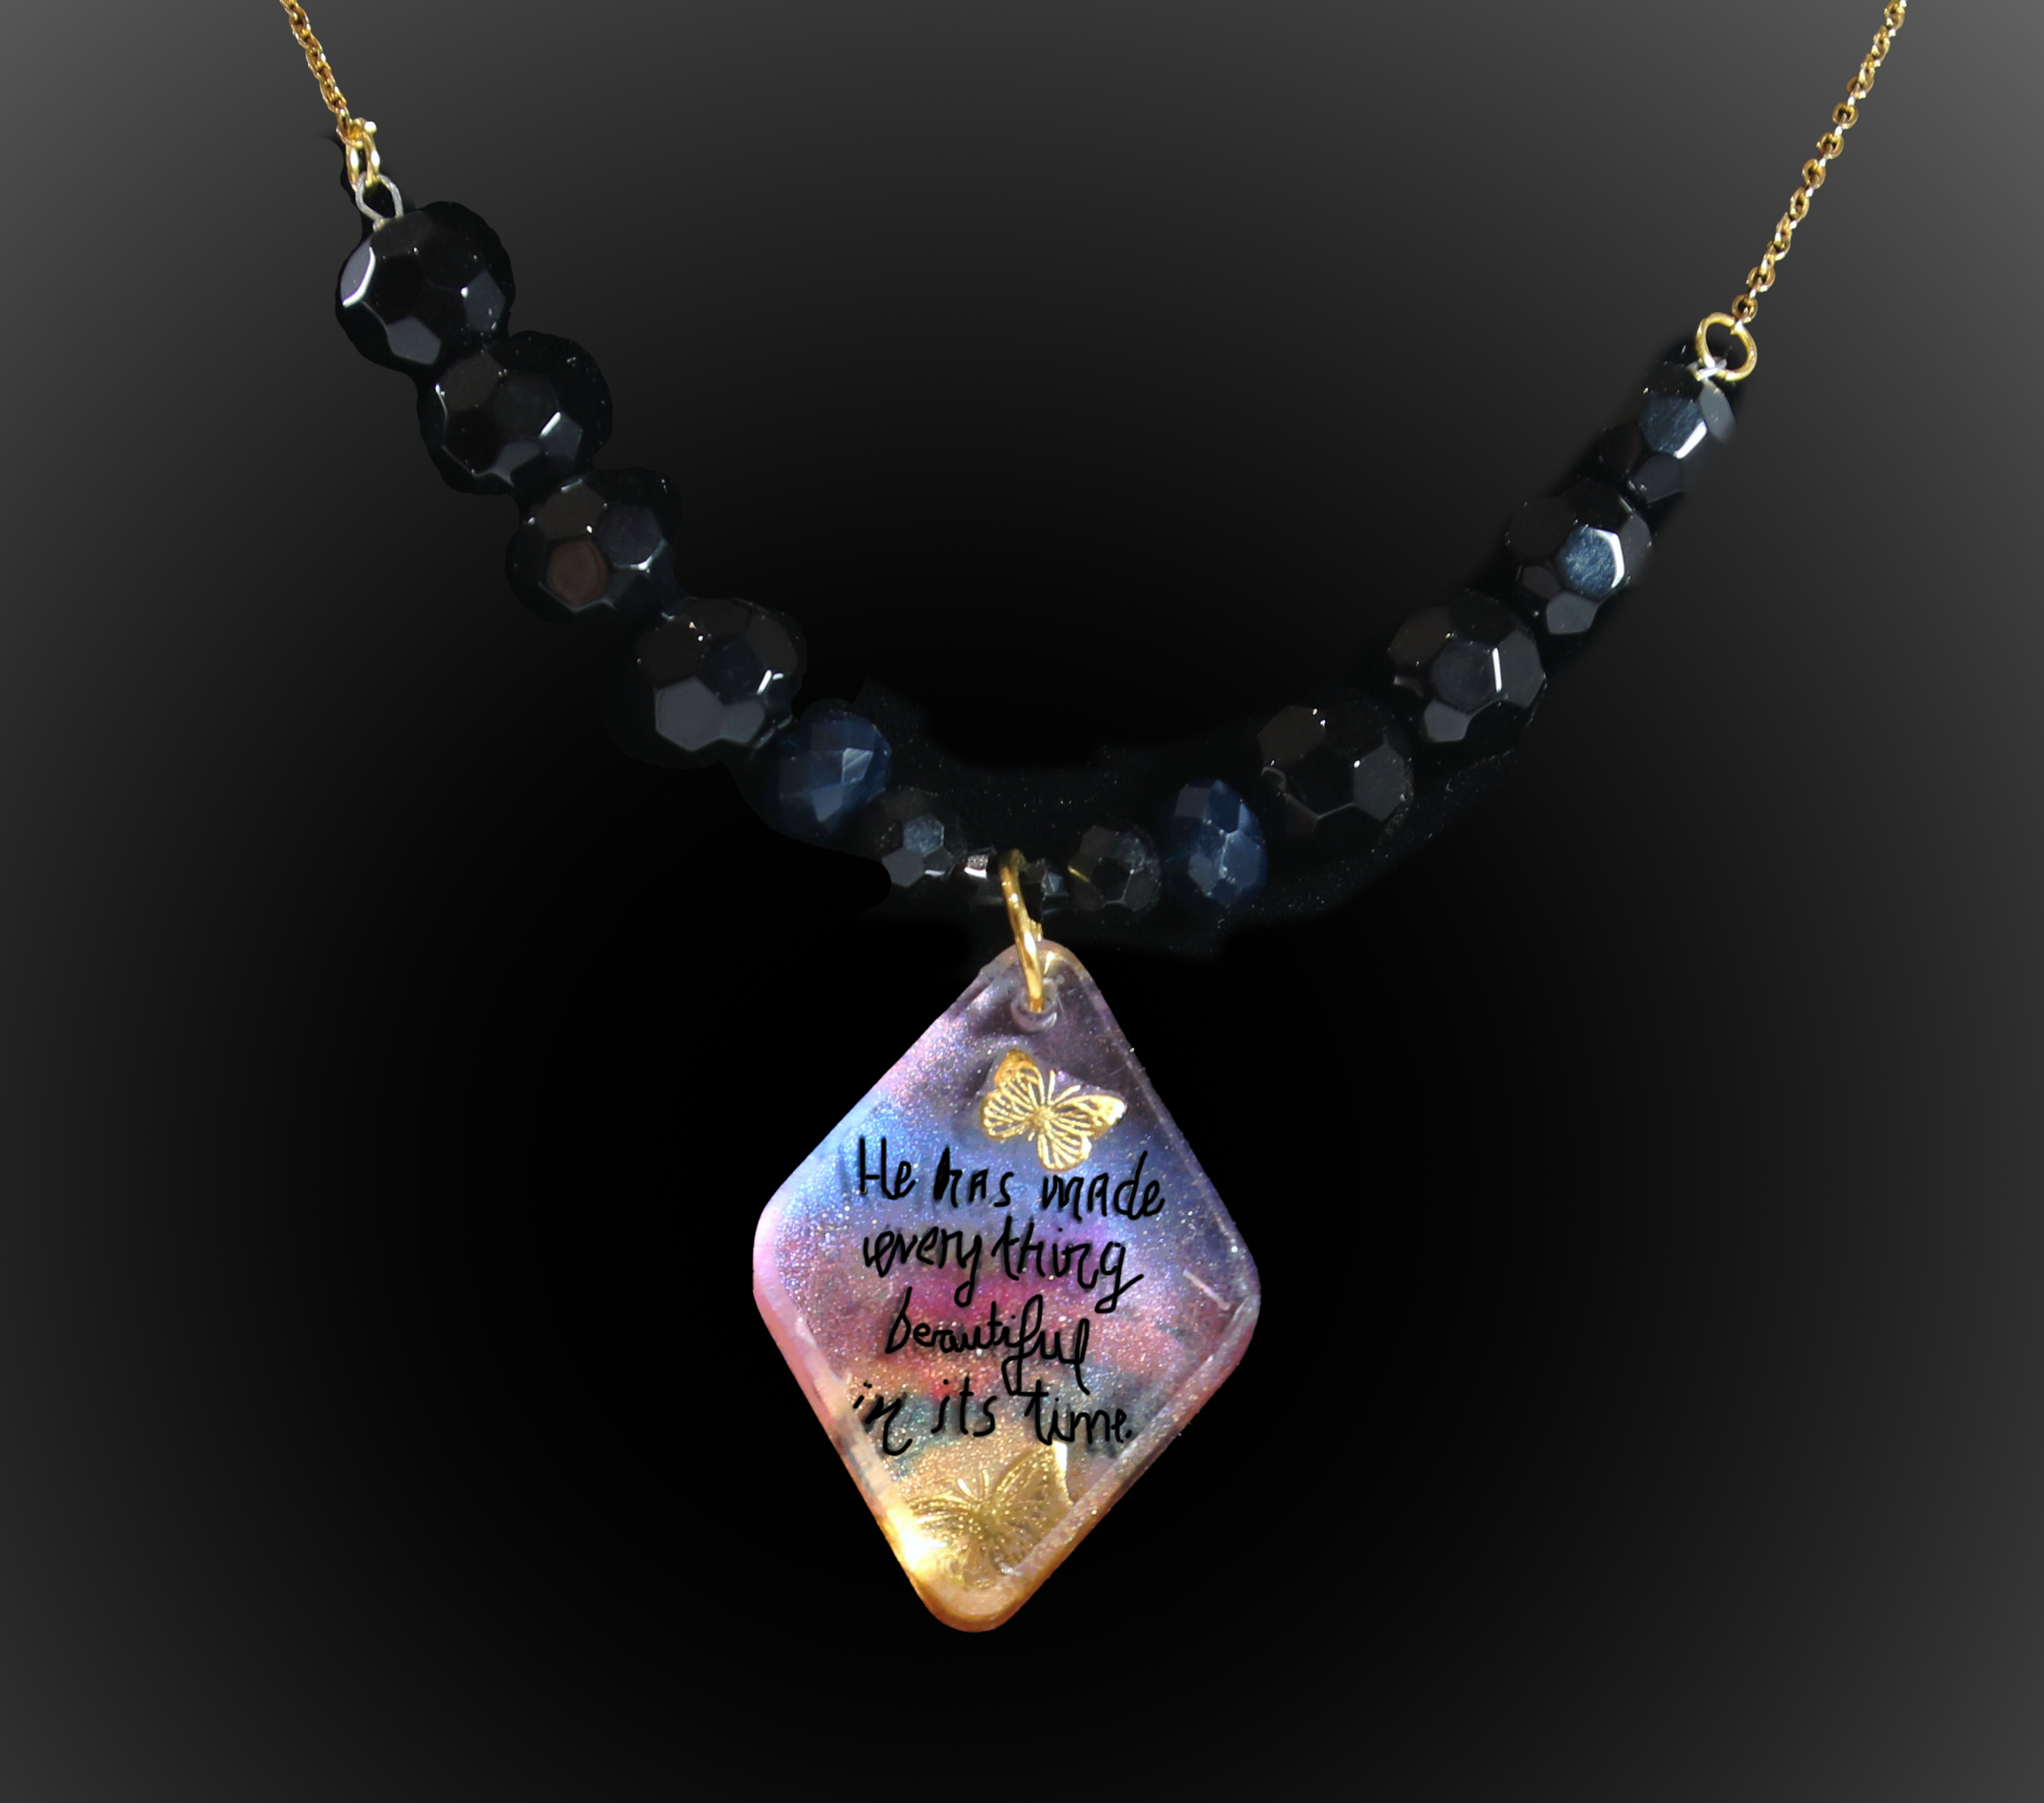 Inspirational Sayings Pendant and Necklace